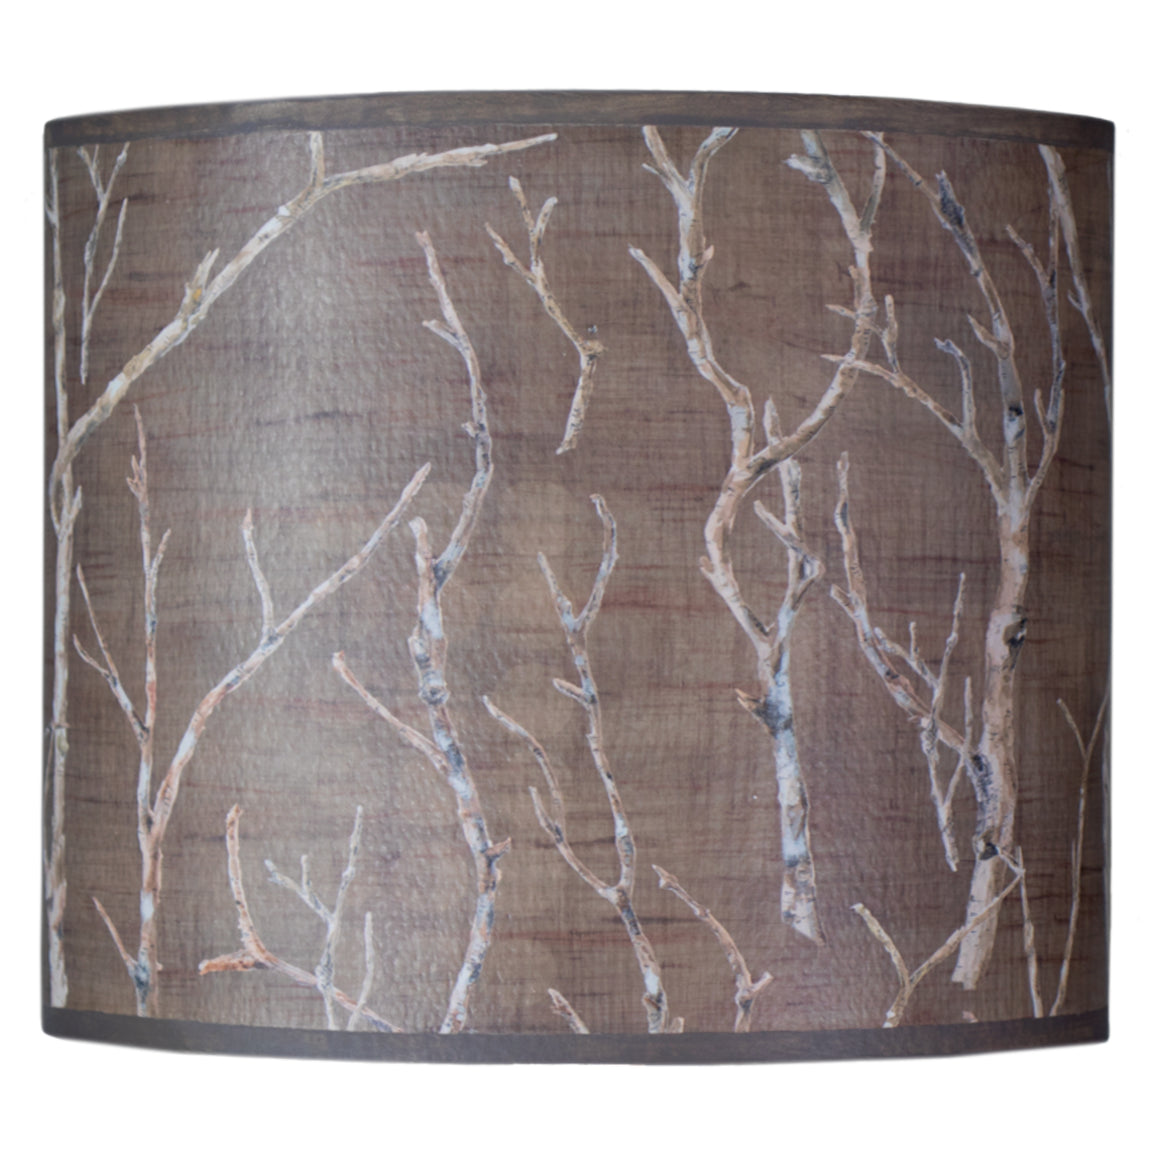 Large Oval Drum Lamp Shade in Twigs